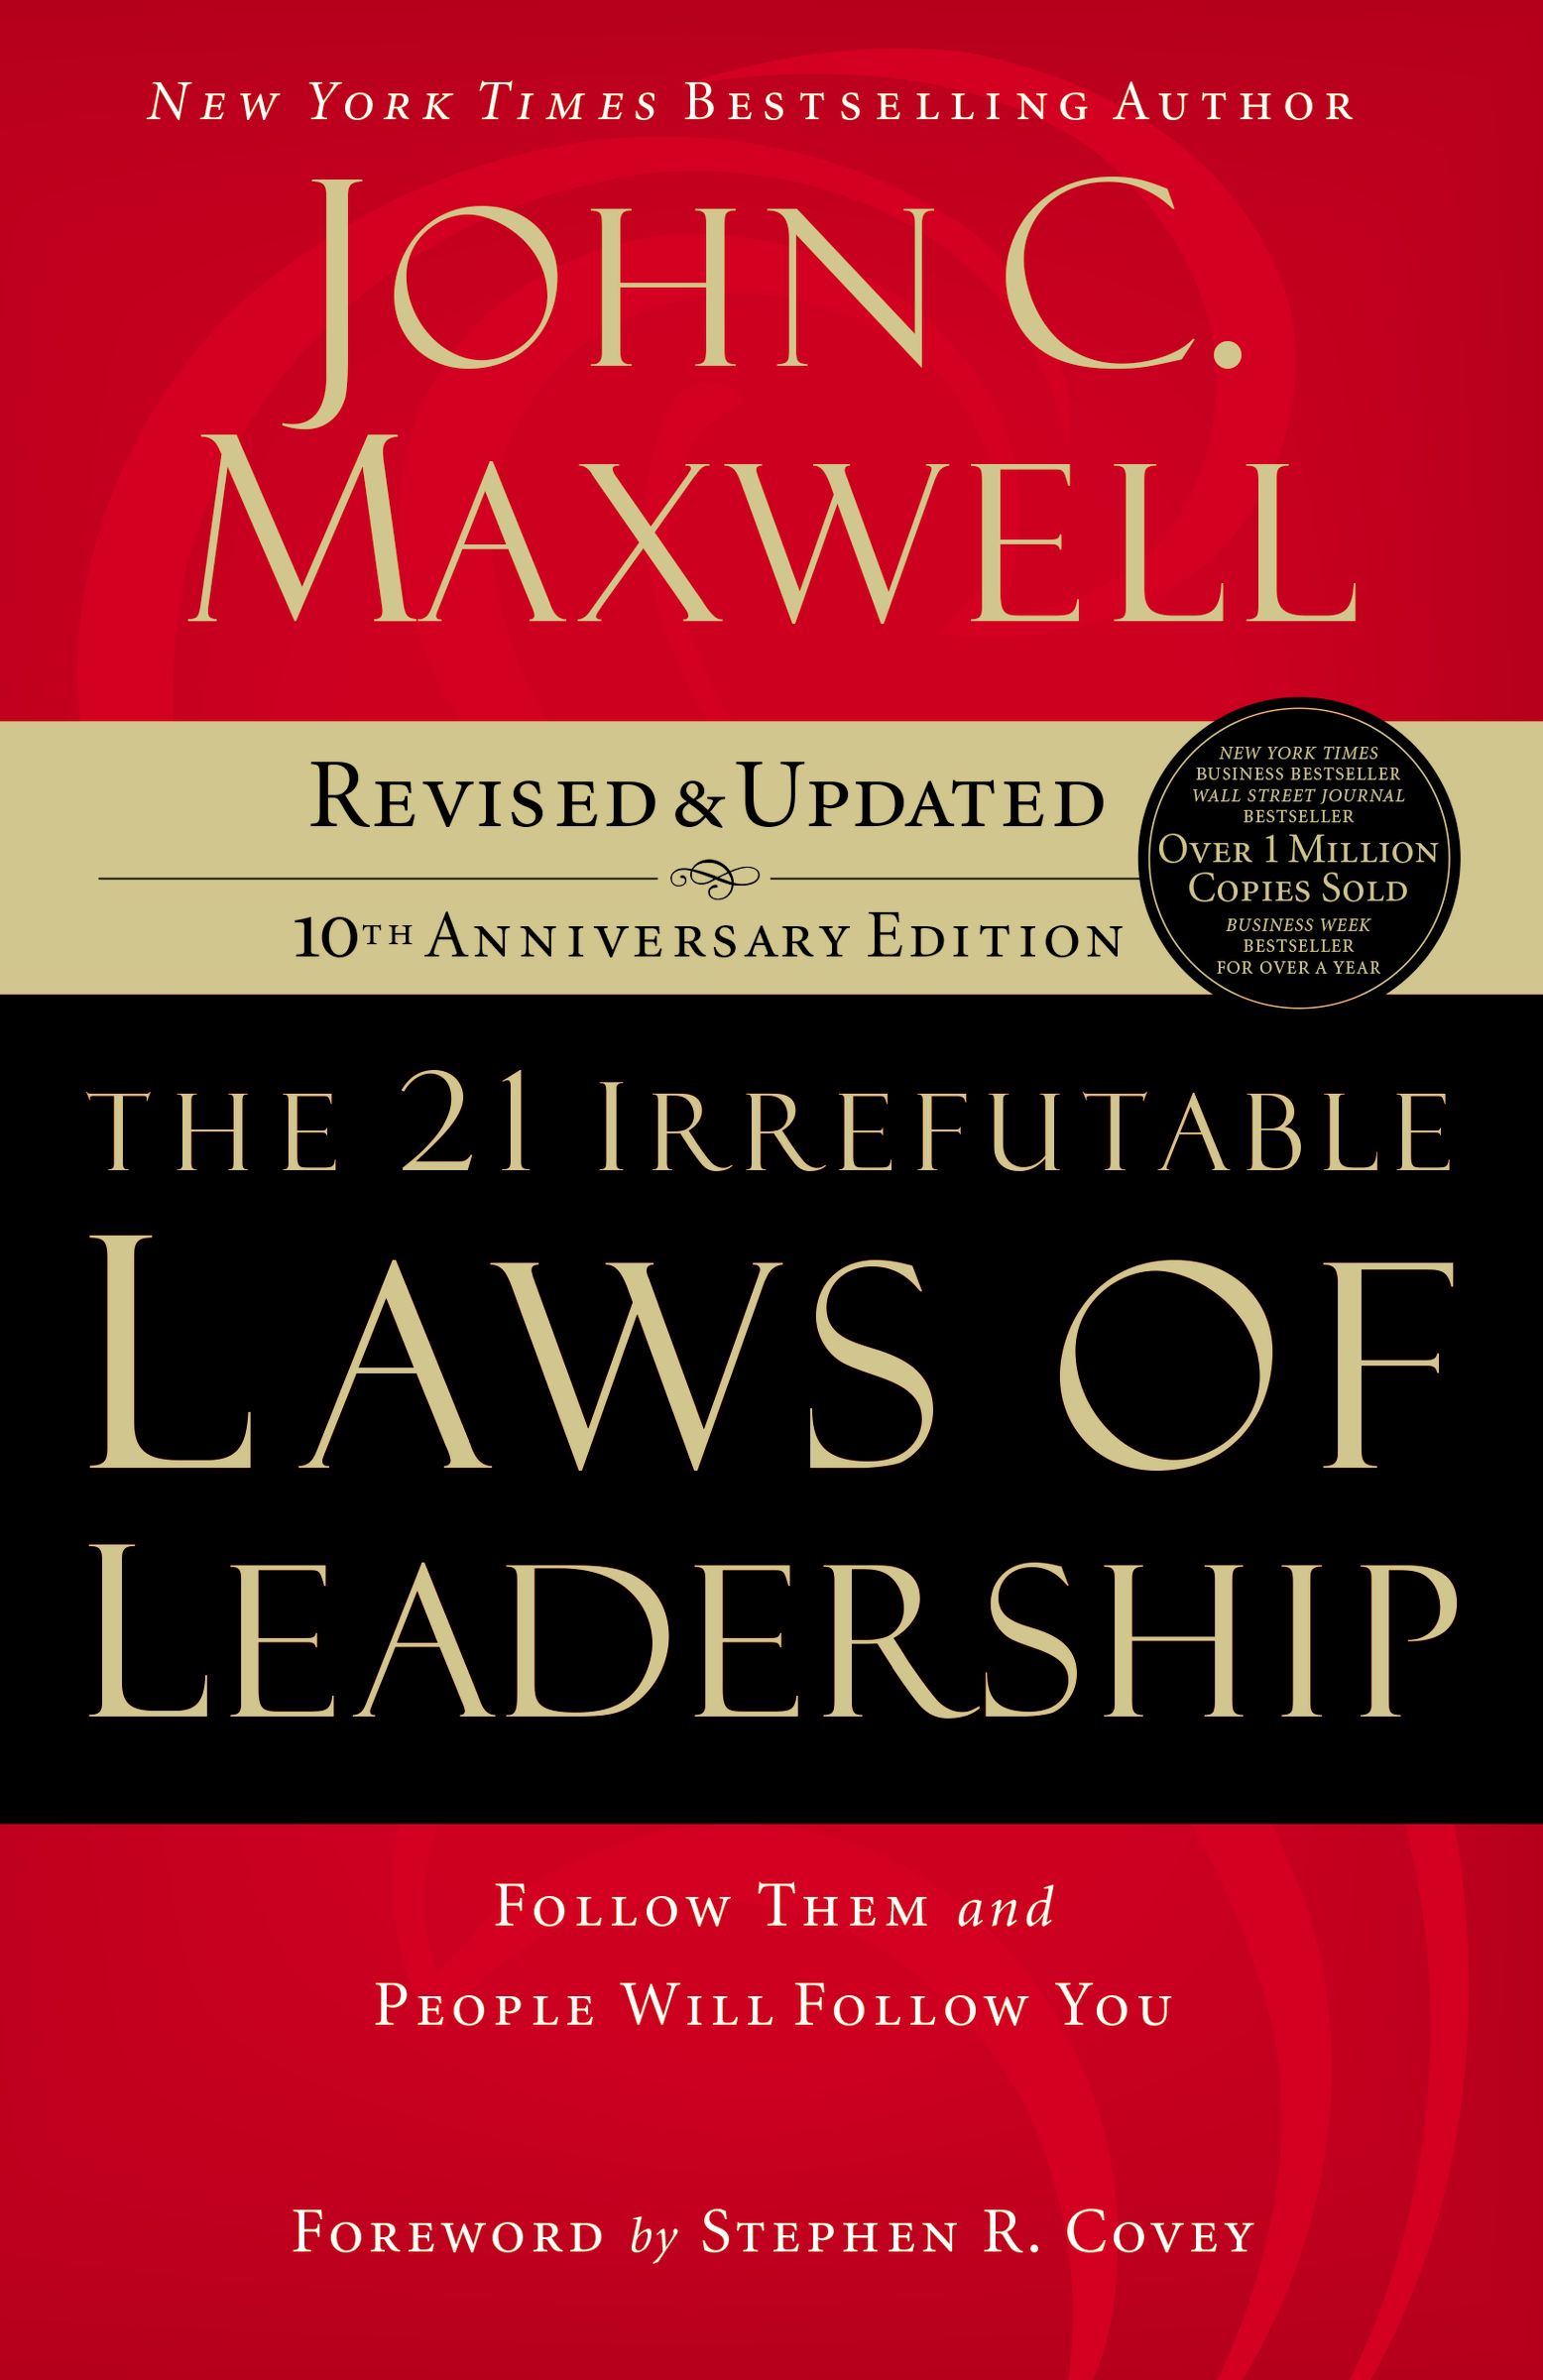 The 21 Irrefutable Laws of Leadership By John C Maxwell (Paperback)